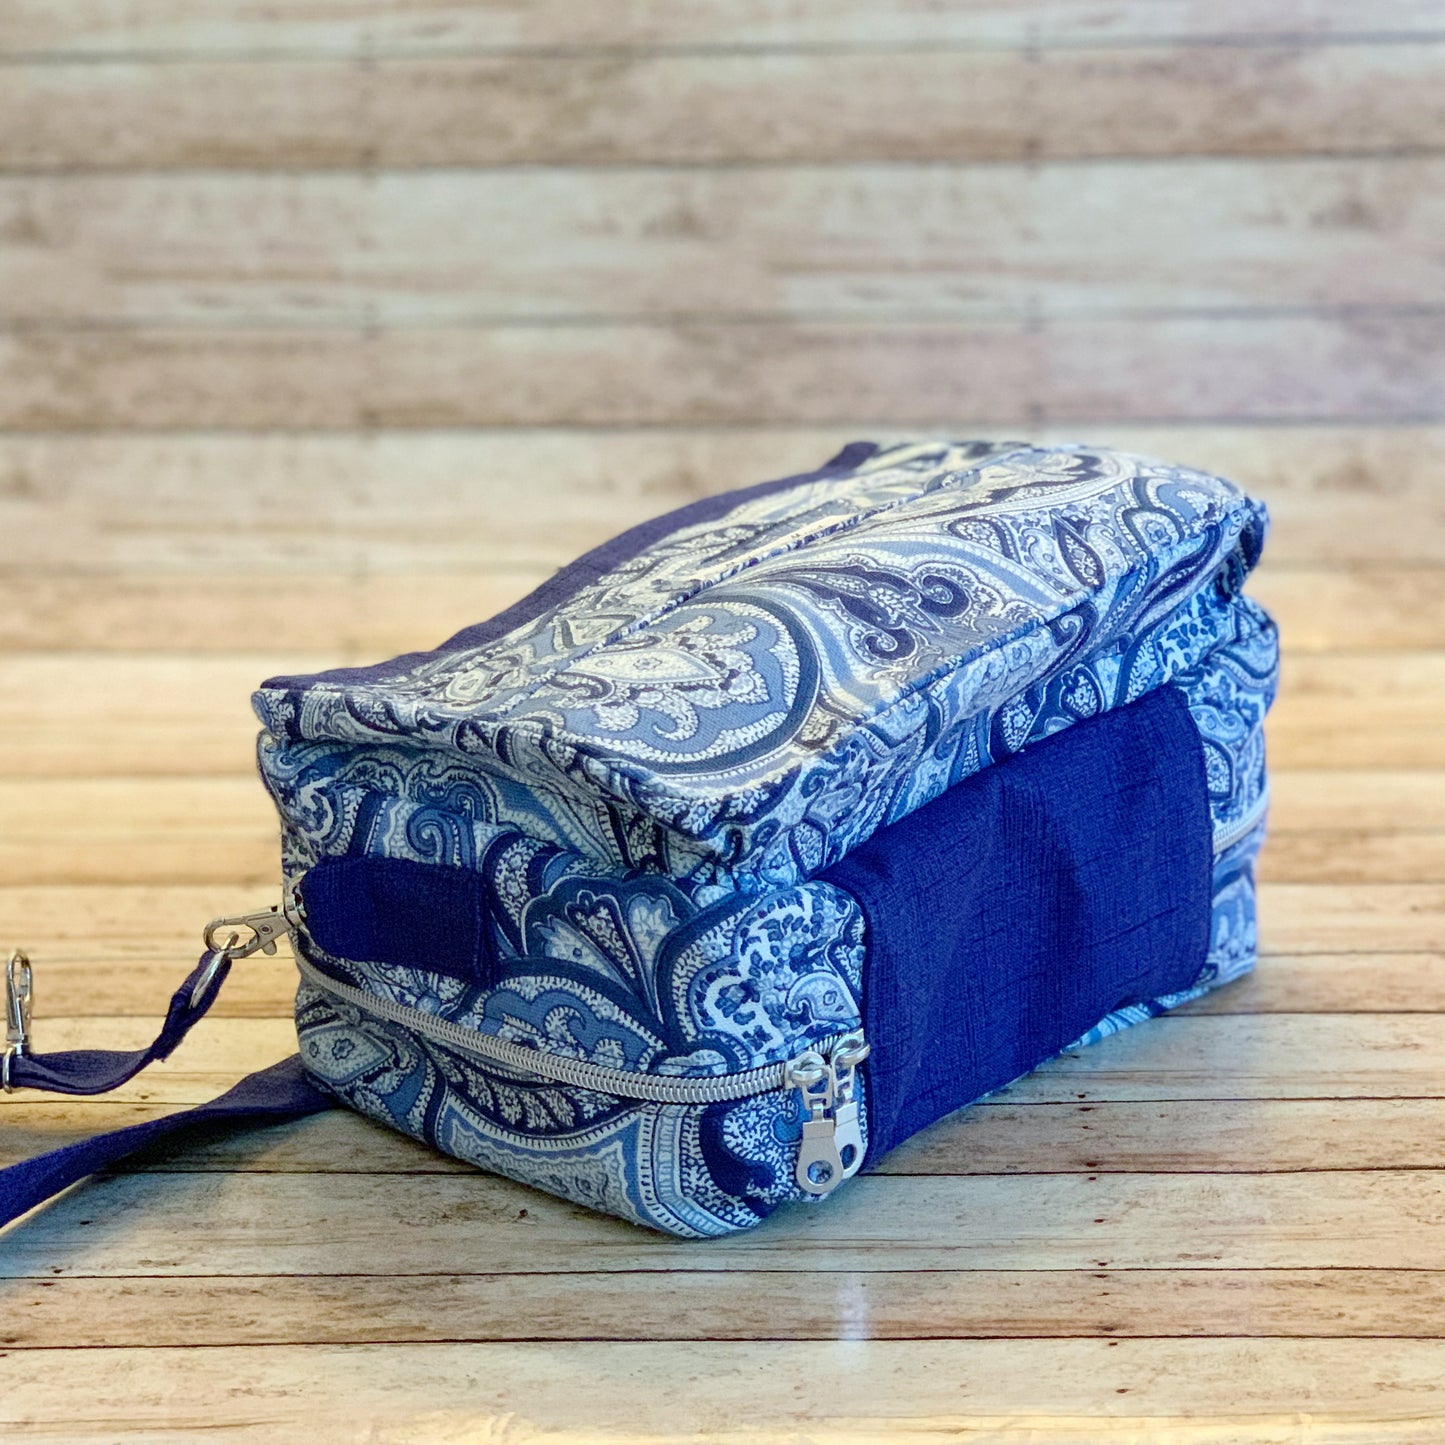 Bottom/side view of multi colored blue Bible Bag with silver two-way zipper